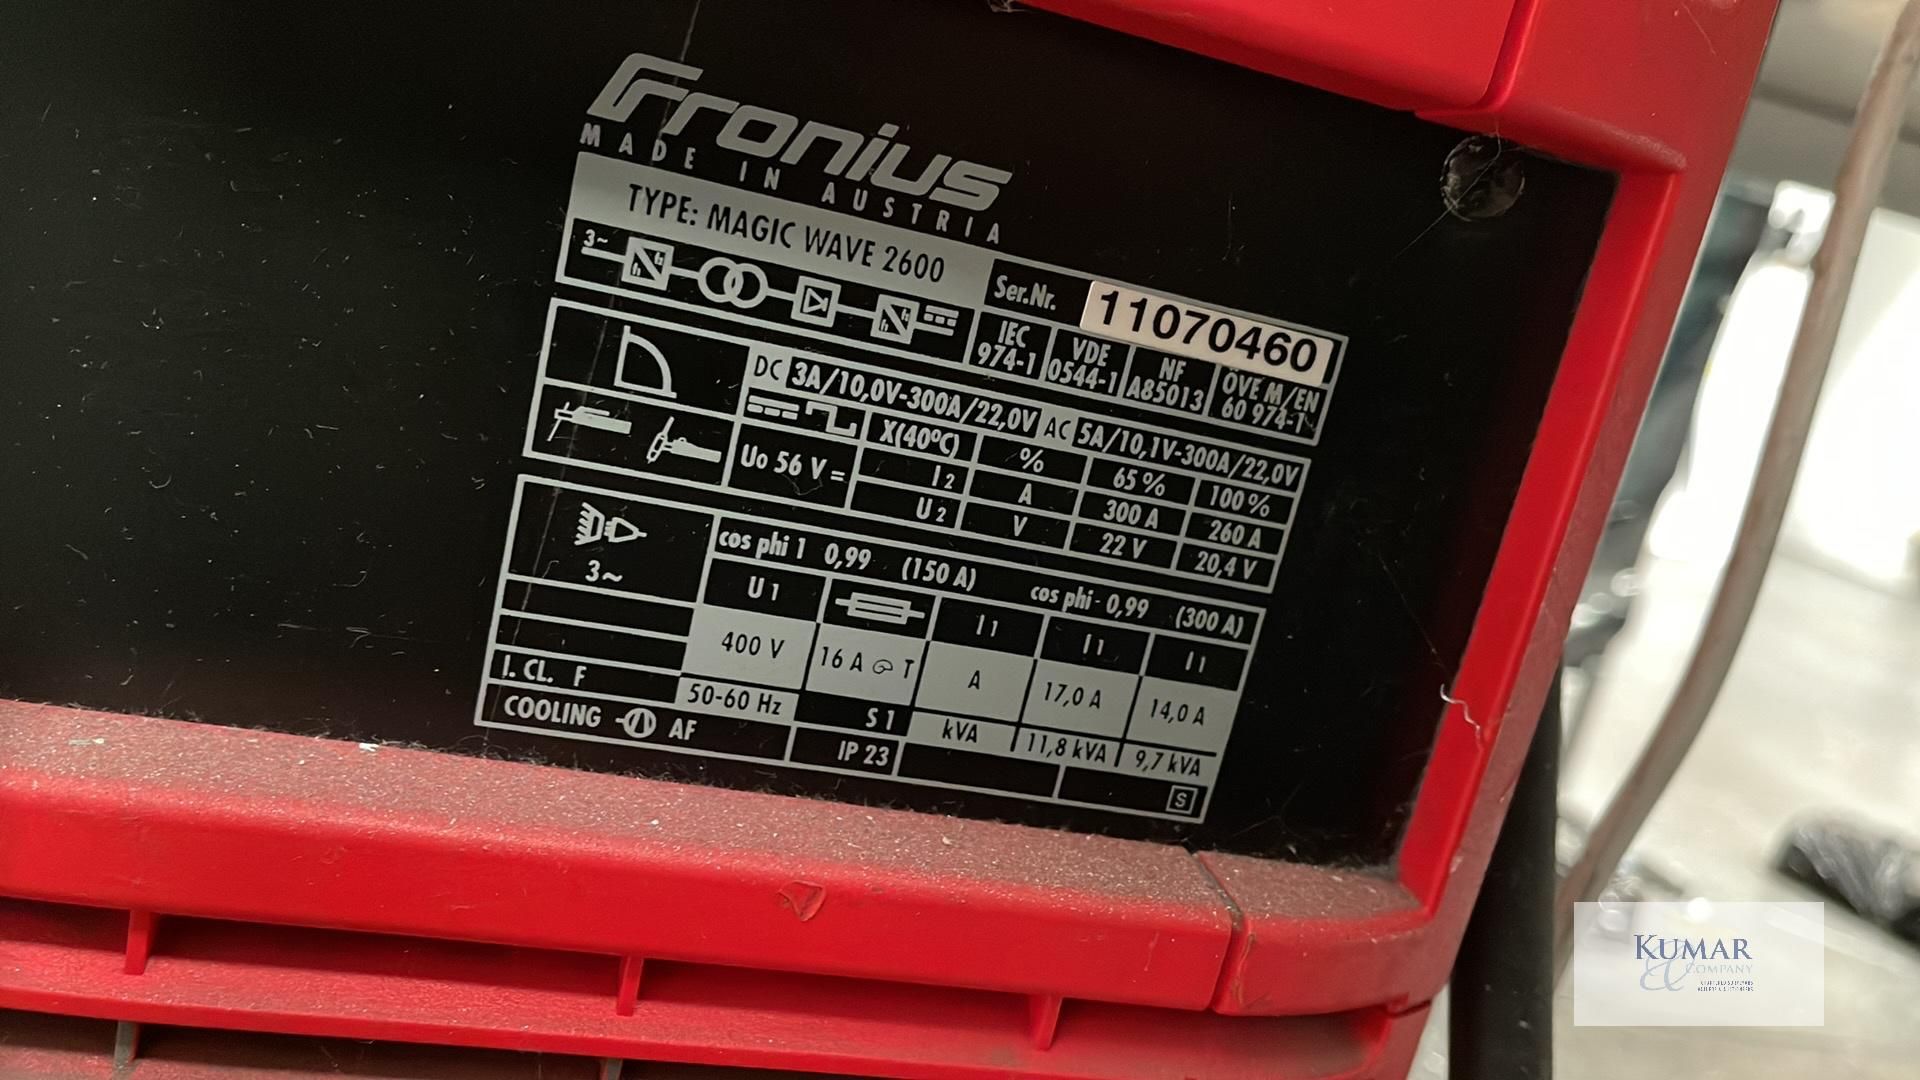 Fronius Magic Wave 2600 Water Cooled AC/DC Tig Power Source Serial No.11074060 - Does Not Include - Image 3 of 6